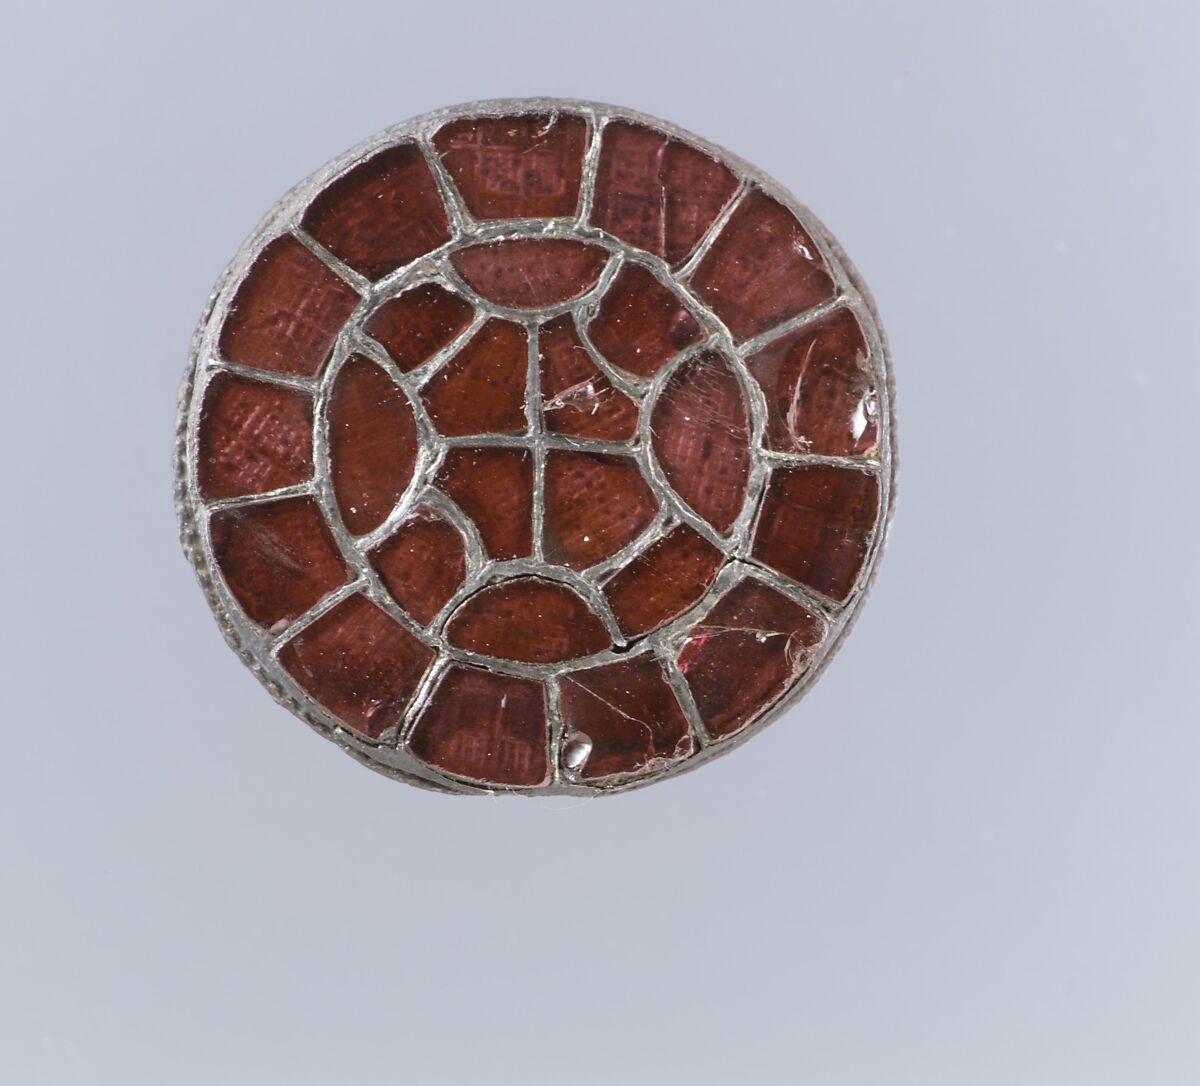 Disk Brooch, Silver-gilt, garnets with patterned foil backings, and pearl, Frankish 